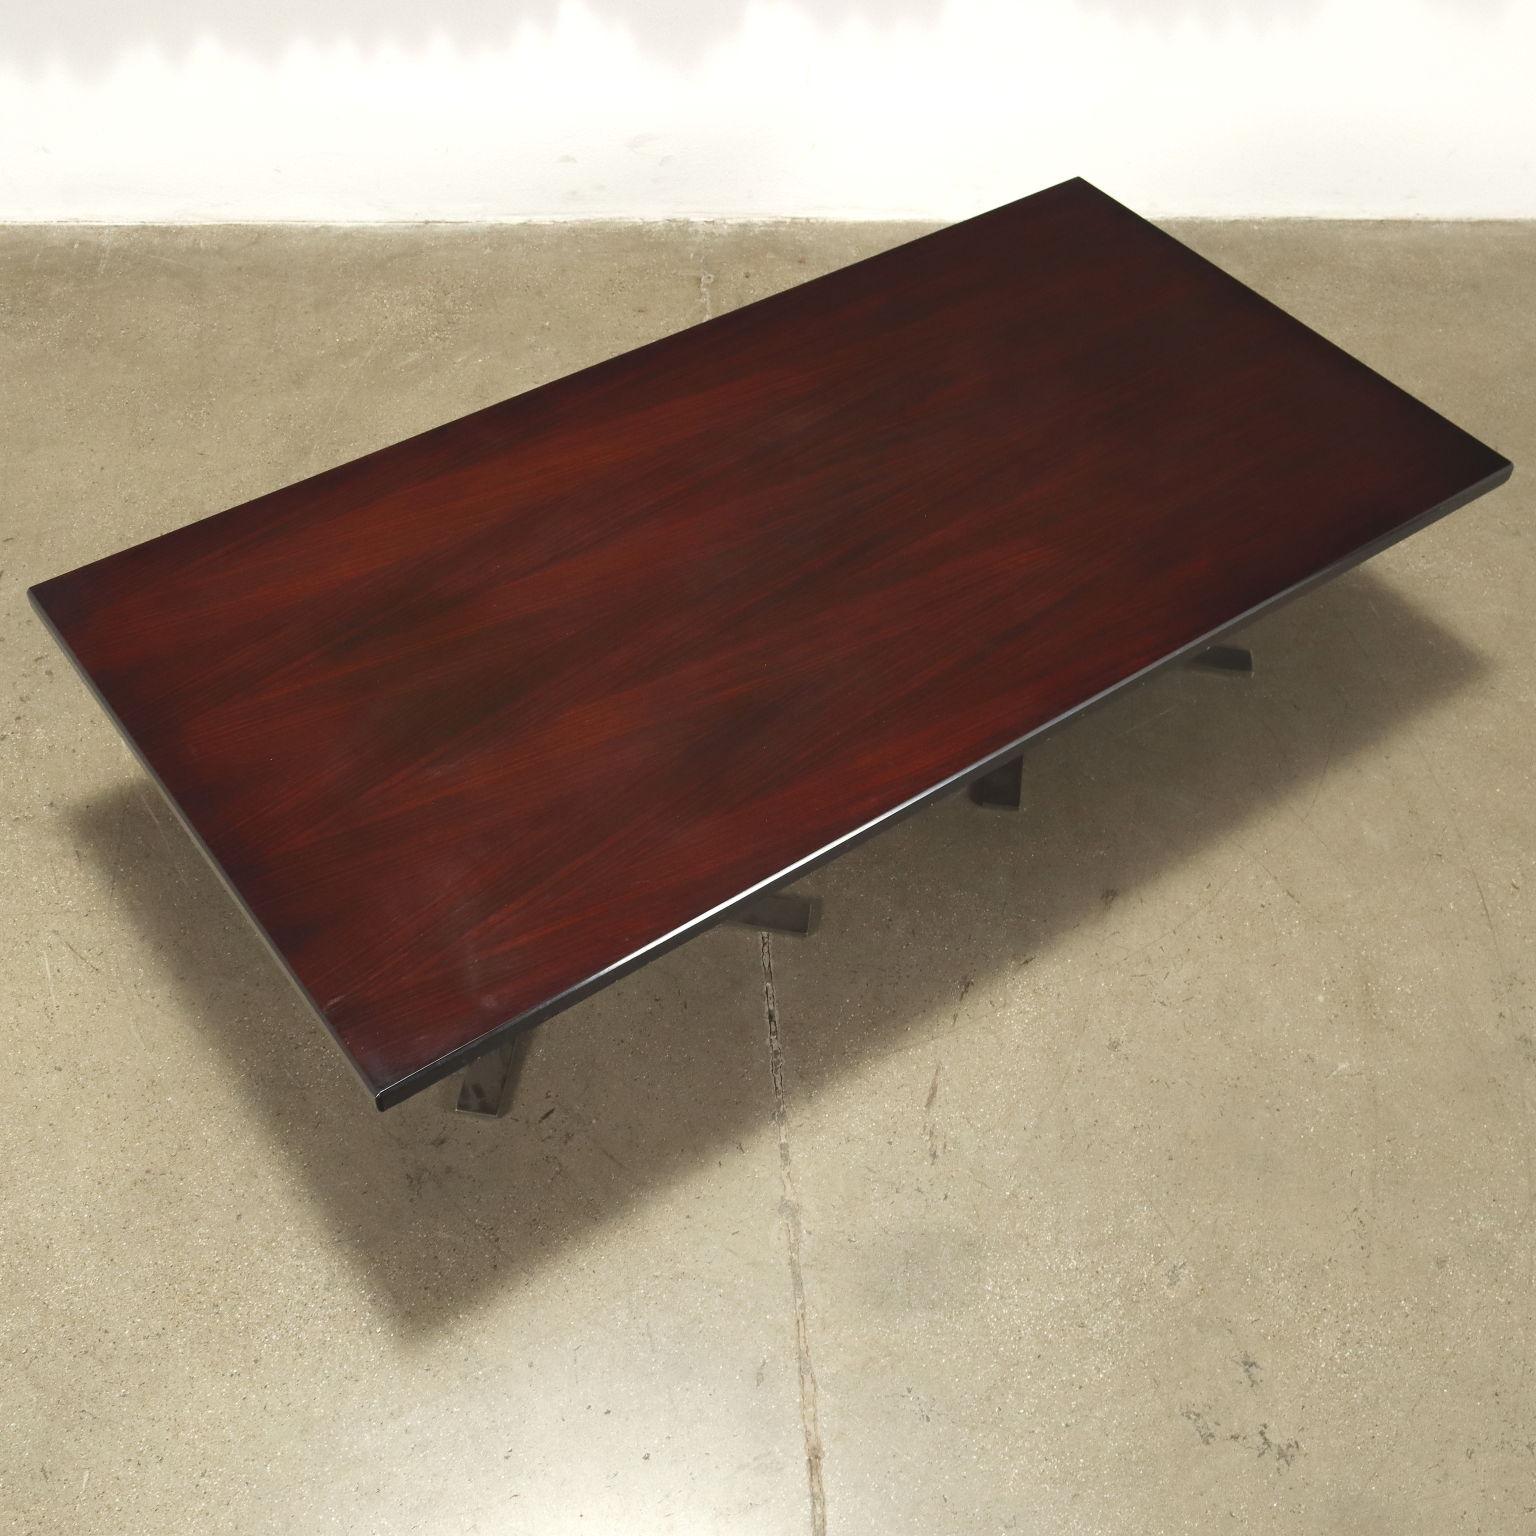 Center coffee table; stained exotic wood veneer, chrome metal base. Good conditions.